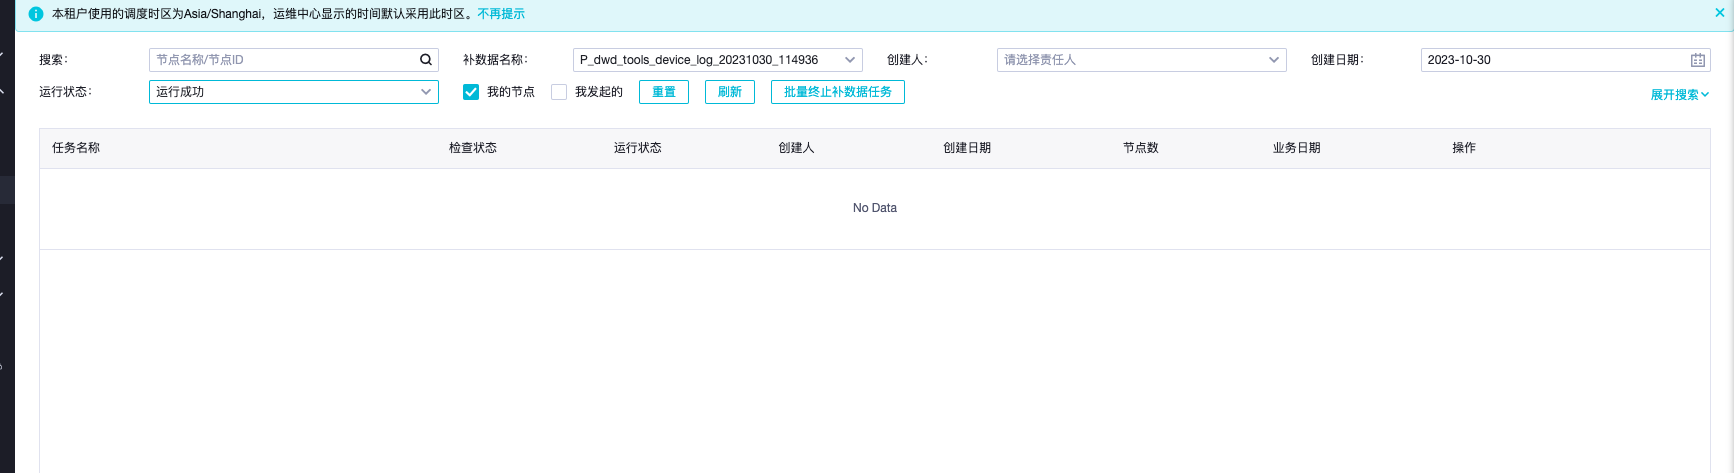 DataWorks操作报错合集之DataWorksUDF 报错：evaluate for user defined function xxx cannot be loaded from any resources，该怎么处理